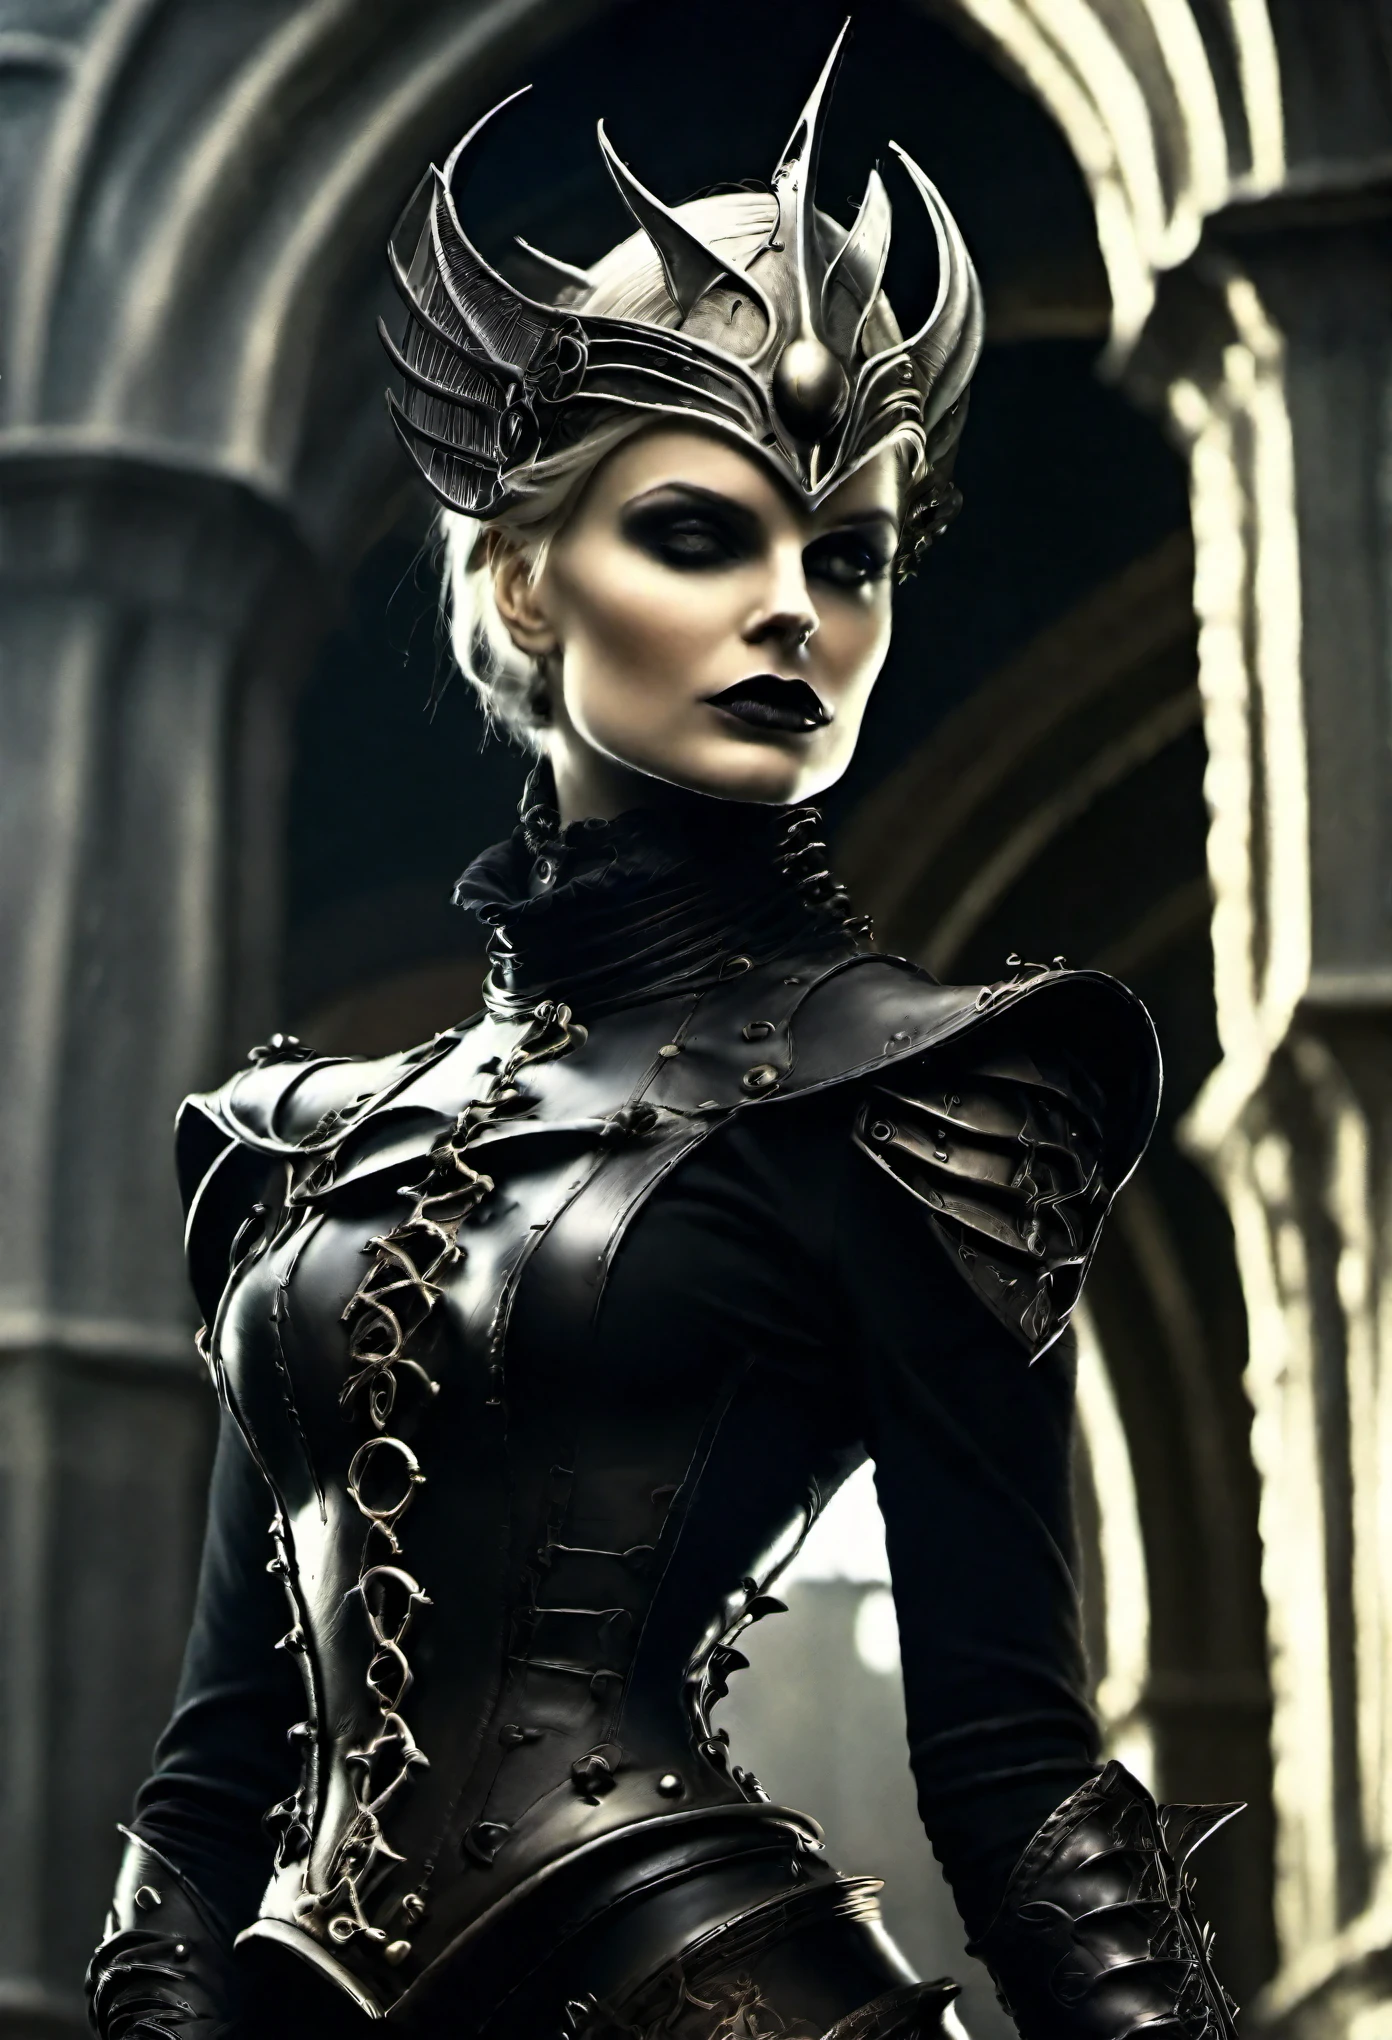 (Realisttic:1.2), ultra detailed, Beautiful woman posing by a tower. warrior. steampunk. Her clothing is both and decorative, emphasizing her form. She has short hair and an elegant expression on her face, with soft features and striking eyes that draw the viewer in. This contrast between the fantastical character and the more traditional Darkest Dungeon color scheme and elements gives the piece an intriguing narrative quality, highly stylized by H.R. Giger. depth of field, bokeh effect, backlit, stylish, elegant, breathtaking, visually rich, masterpiece full body shot.